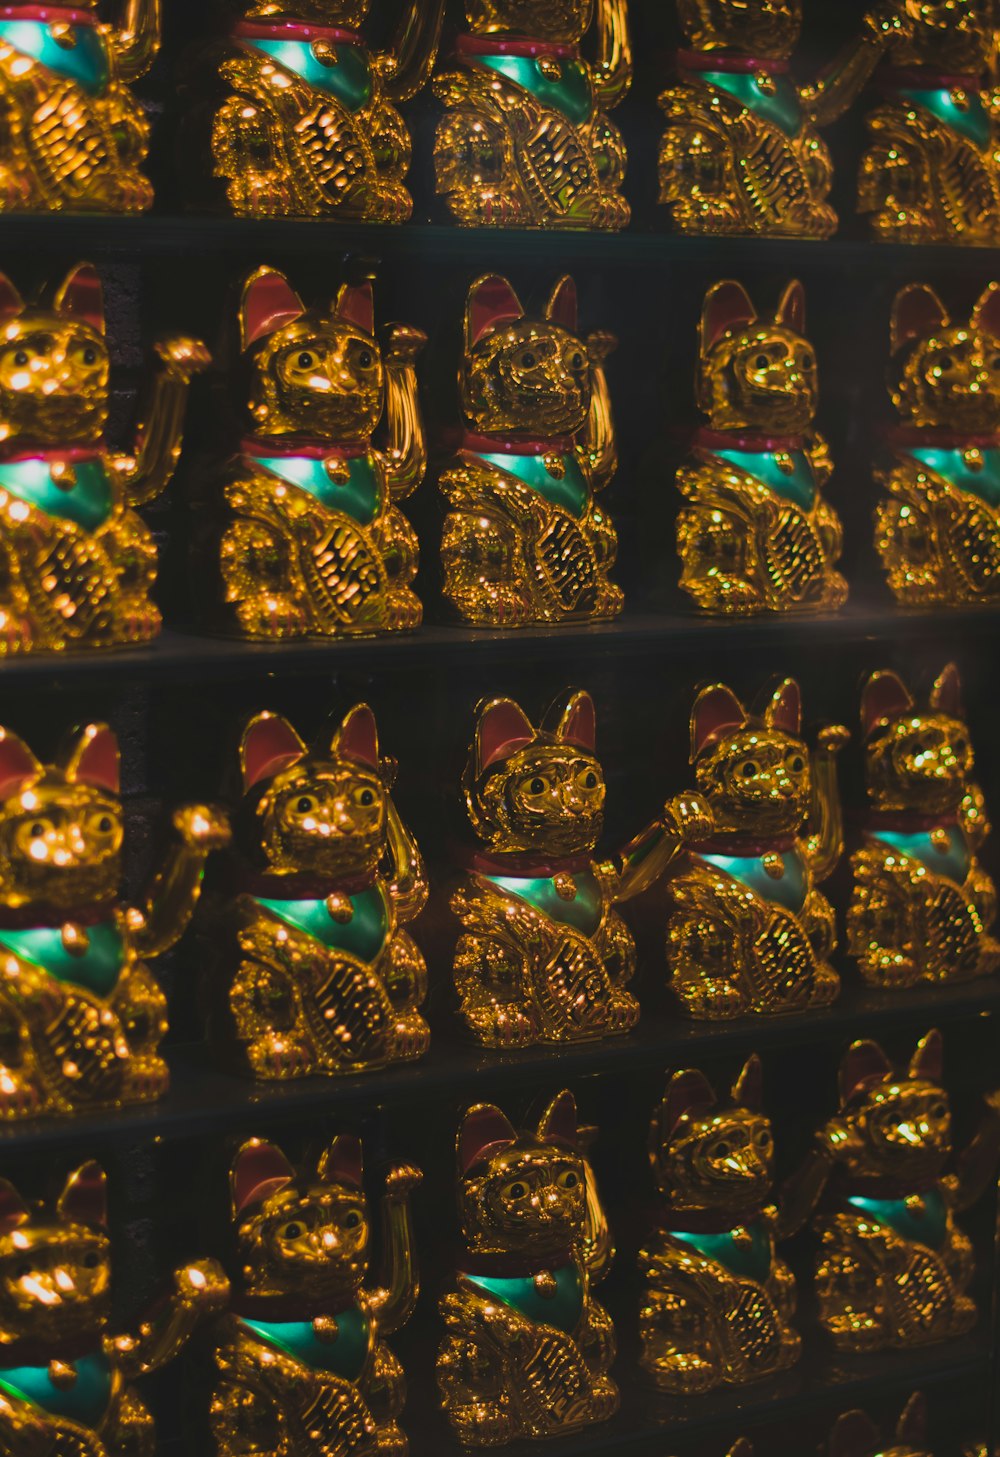 display of gold lucky cat figurines